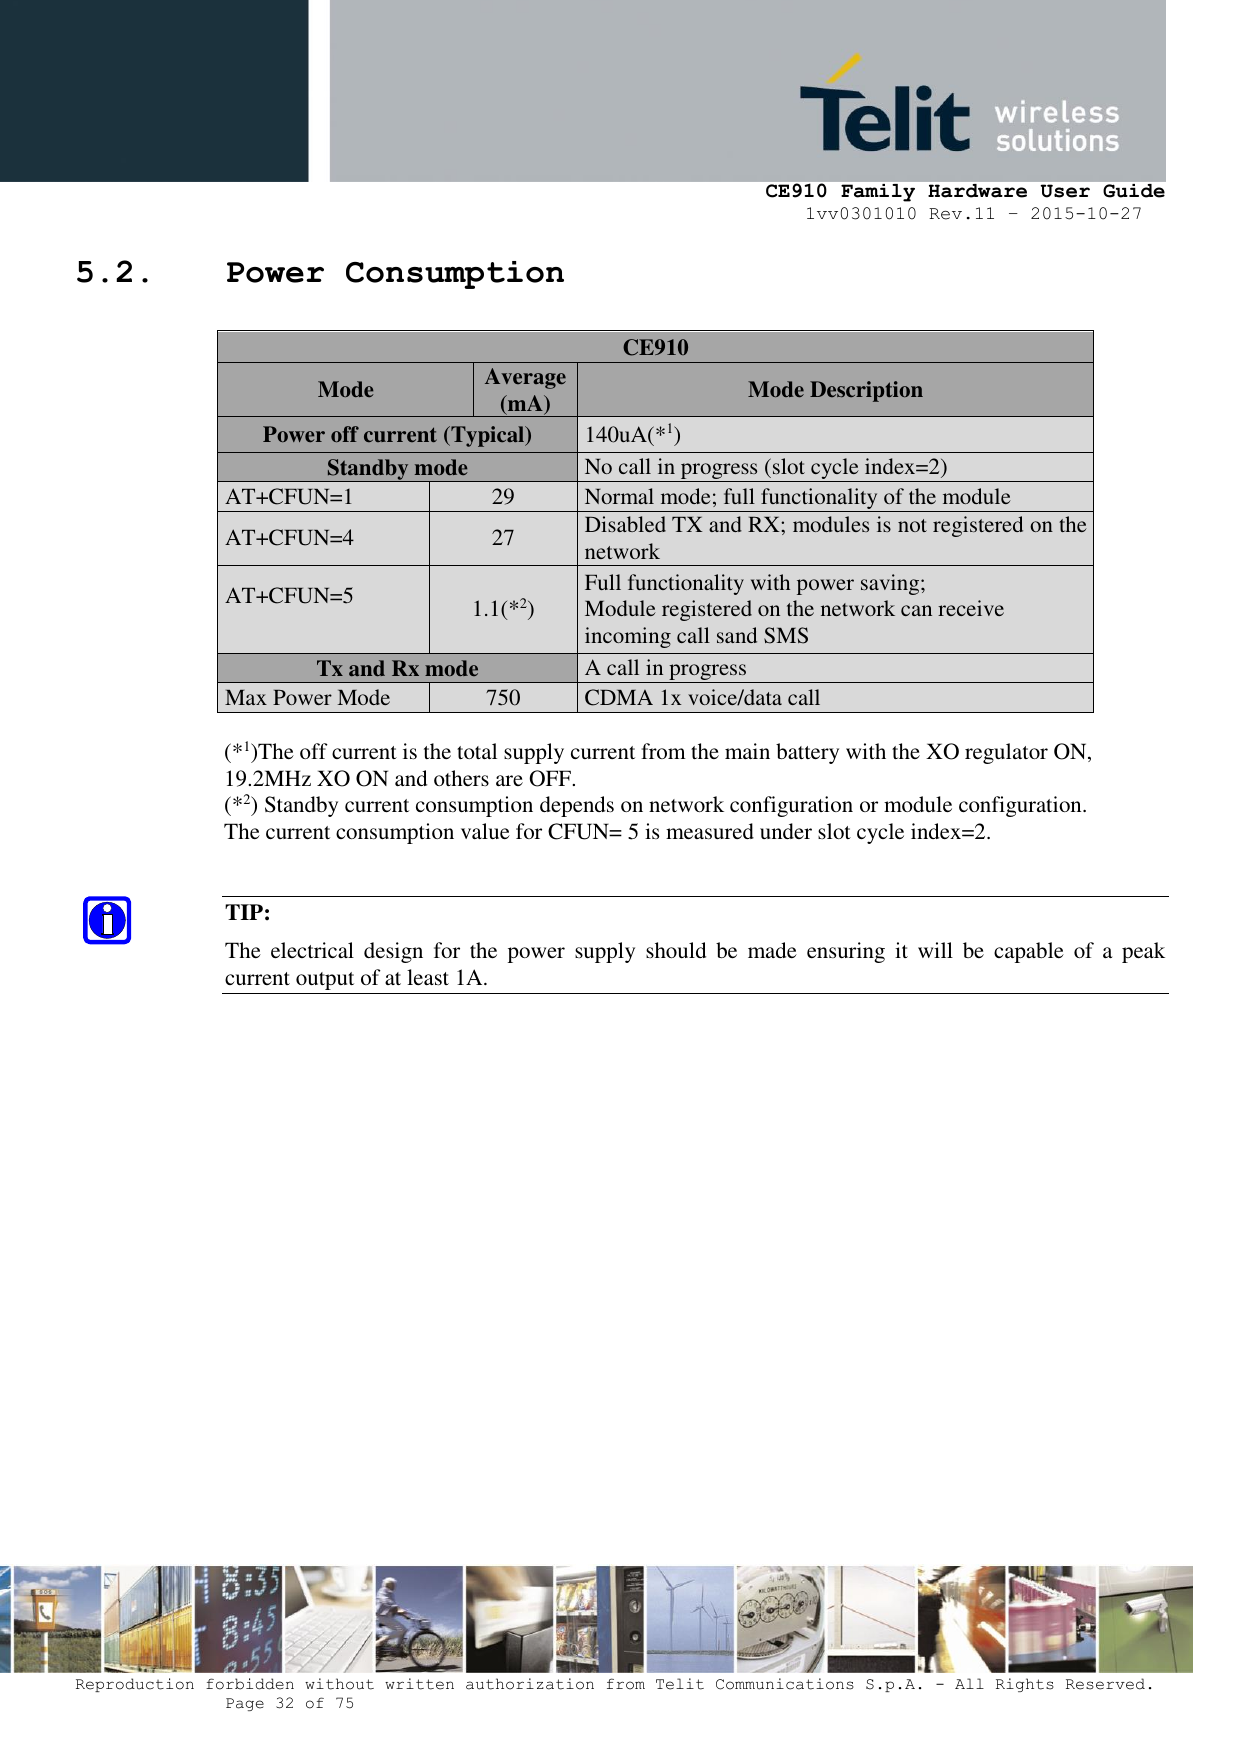     CE910 Family Hardware User Guide 1vv0301010 Rev.11 – 2015-10-27 Reproduction forbidden without written authorization from Telit Communications S.p.A. - All Rights Reserved.    Page 32 of 75                                                     5.2. Power Consumption CE910 Mode Average (mA) Mode Description Power off current (Typical) 140uA(*1) Standby mode No call in progress (slot cycle index=2) AT+CFUN=1 29 Normal mode; full functionality of the module AT+CFUN=4 27 Disabled TX and RX; modules is not registered on the network AT+CFUN=5  1.1(*2) Full functionality with power saving; Module registered on the network can receive  incoming call sand SMS Tx and Rx mode A call in progress Max Power Mode 750 CDMA 1x voice/data call  (*1)The off current is the total supply current from the main battery with the XO regulator ON, 19.2MHz XO ON and others are OFF. (*2) Standby current consumption depends on network configuration or module configuration. The current consumption value for CFUN= 5 is measured under slot cycle index=2.  TIP: The  electrical  design  for  the  power  supply  should  be  made  ensuring  it  will  be  capable  of  a  peak current output of at least 1A.            